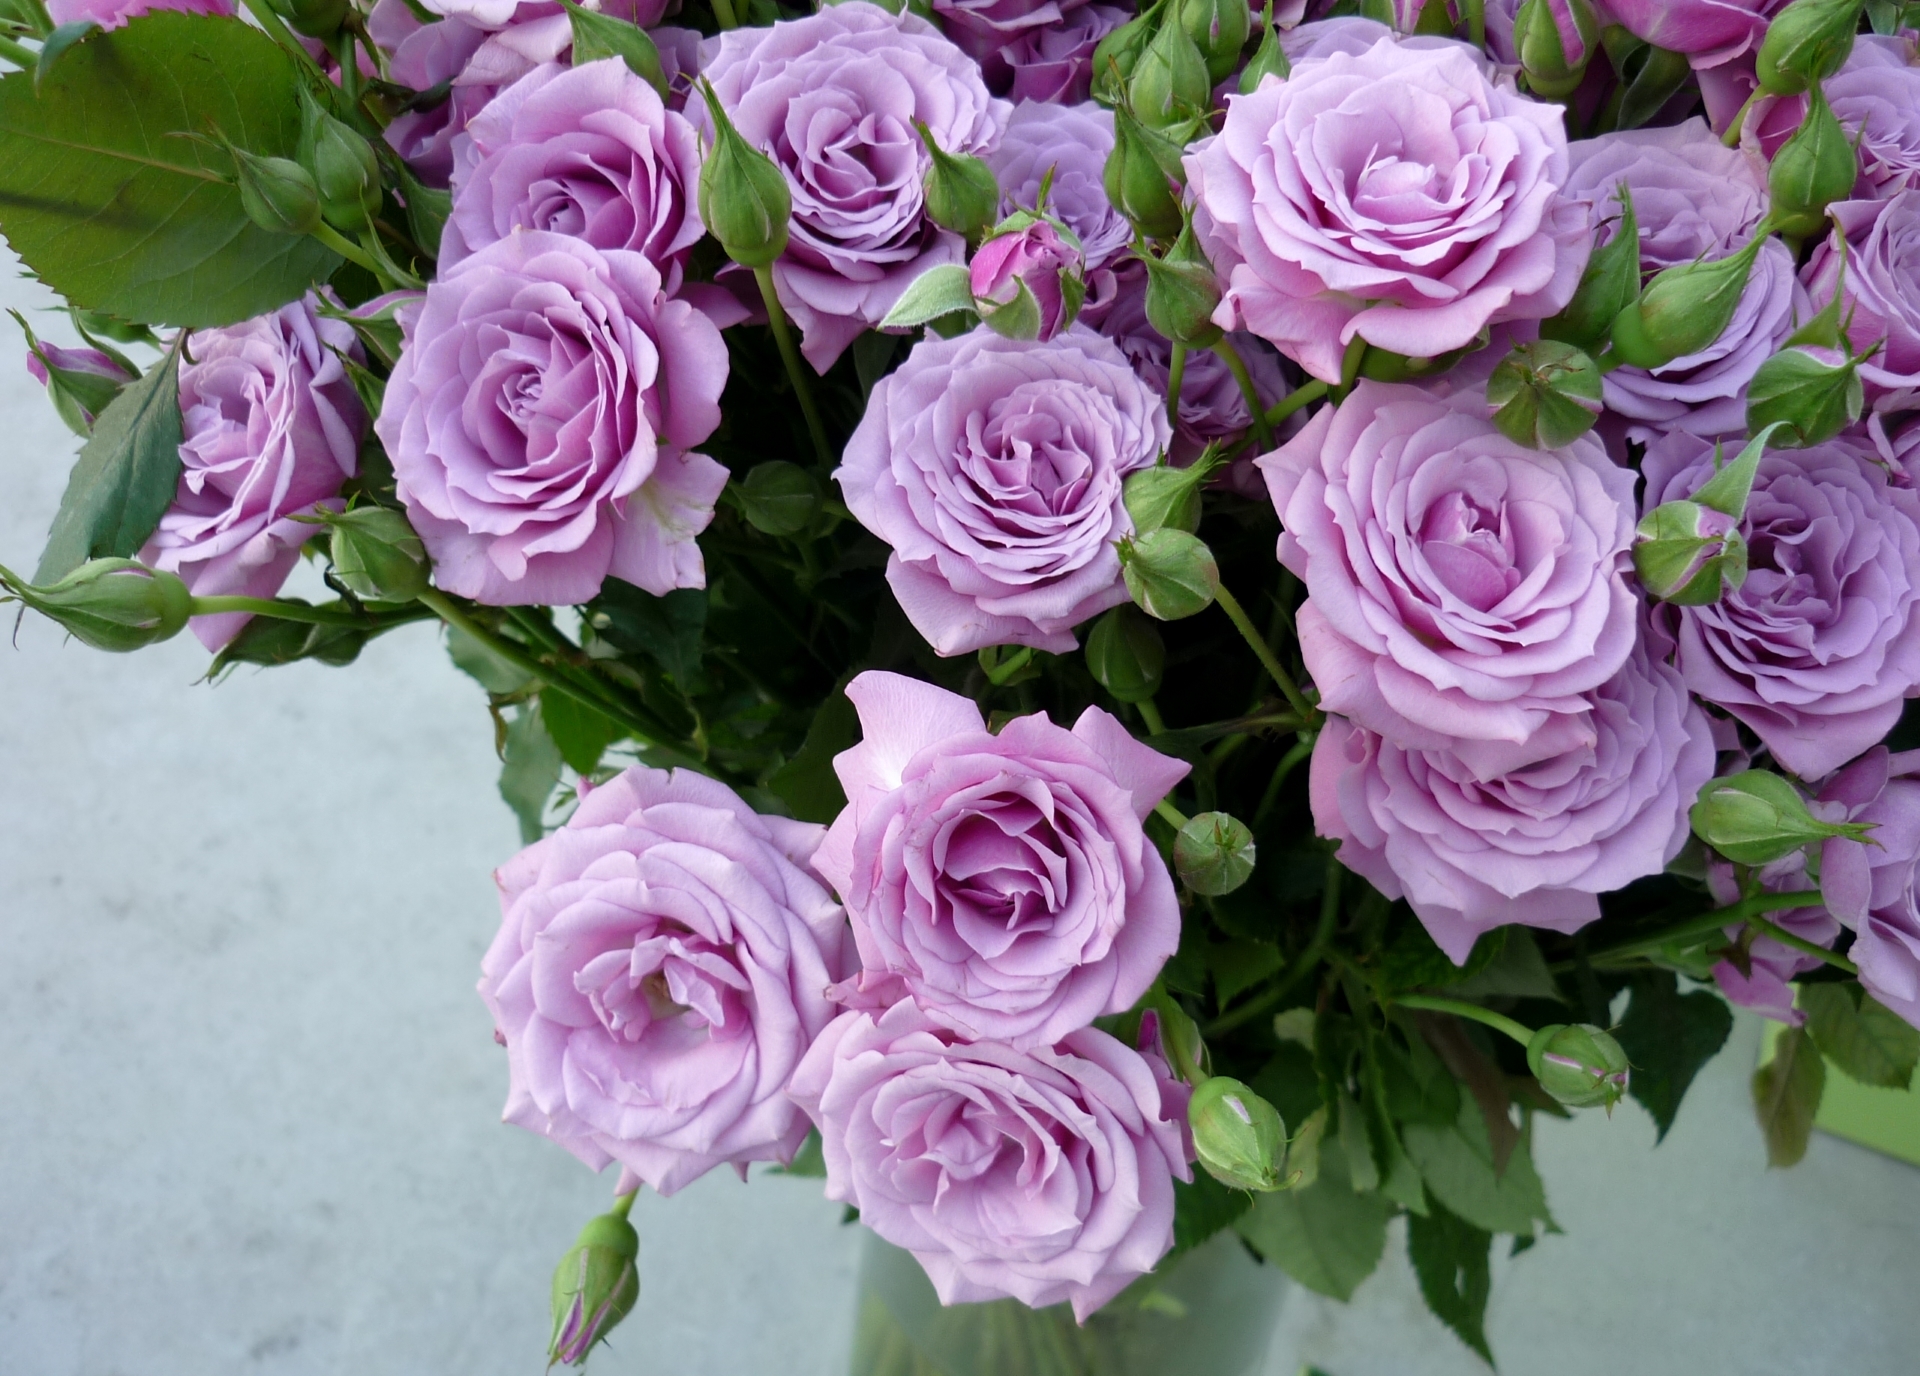 Lavender-Colored Roses